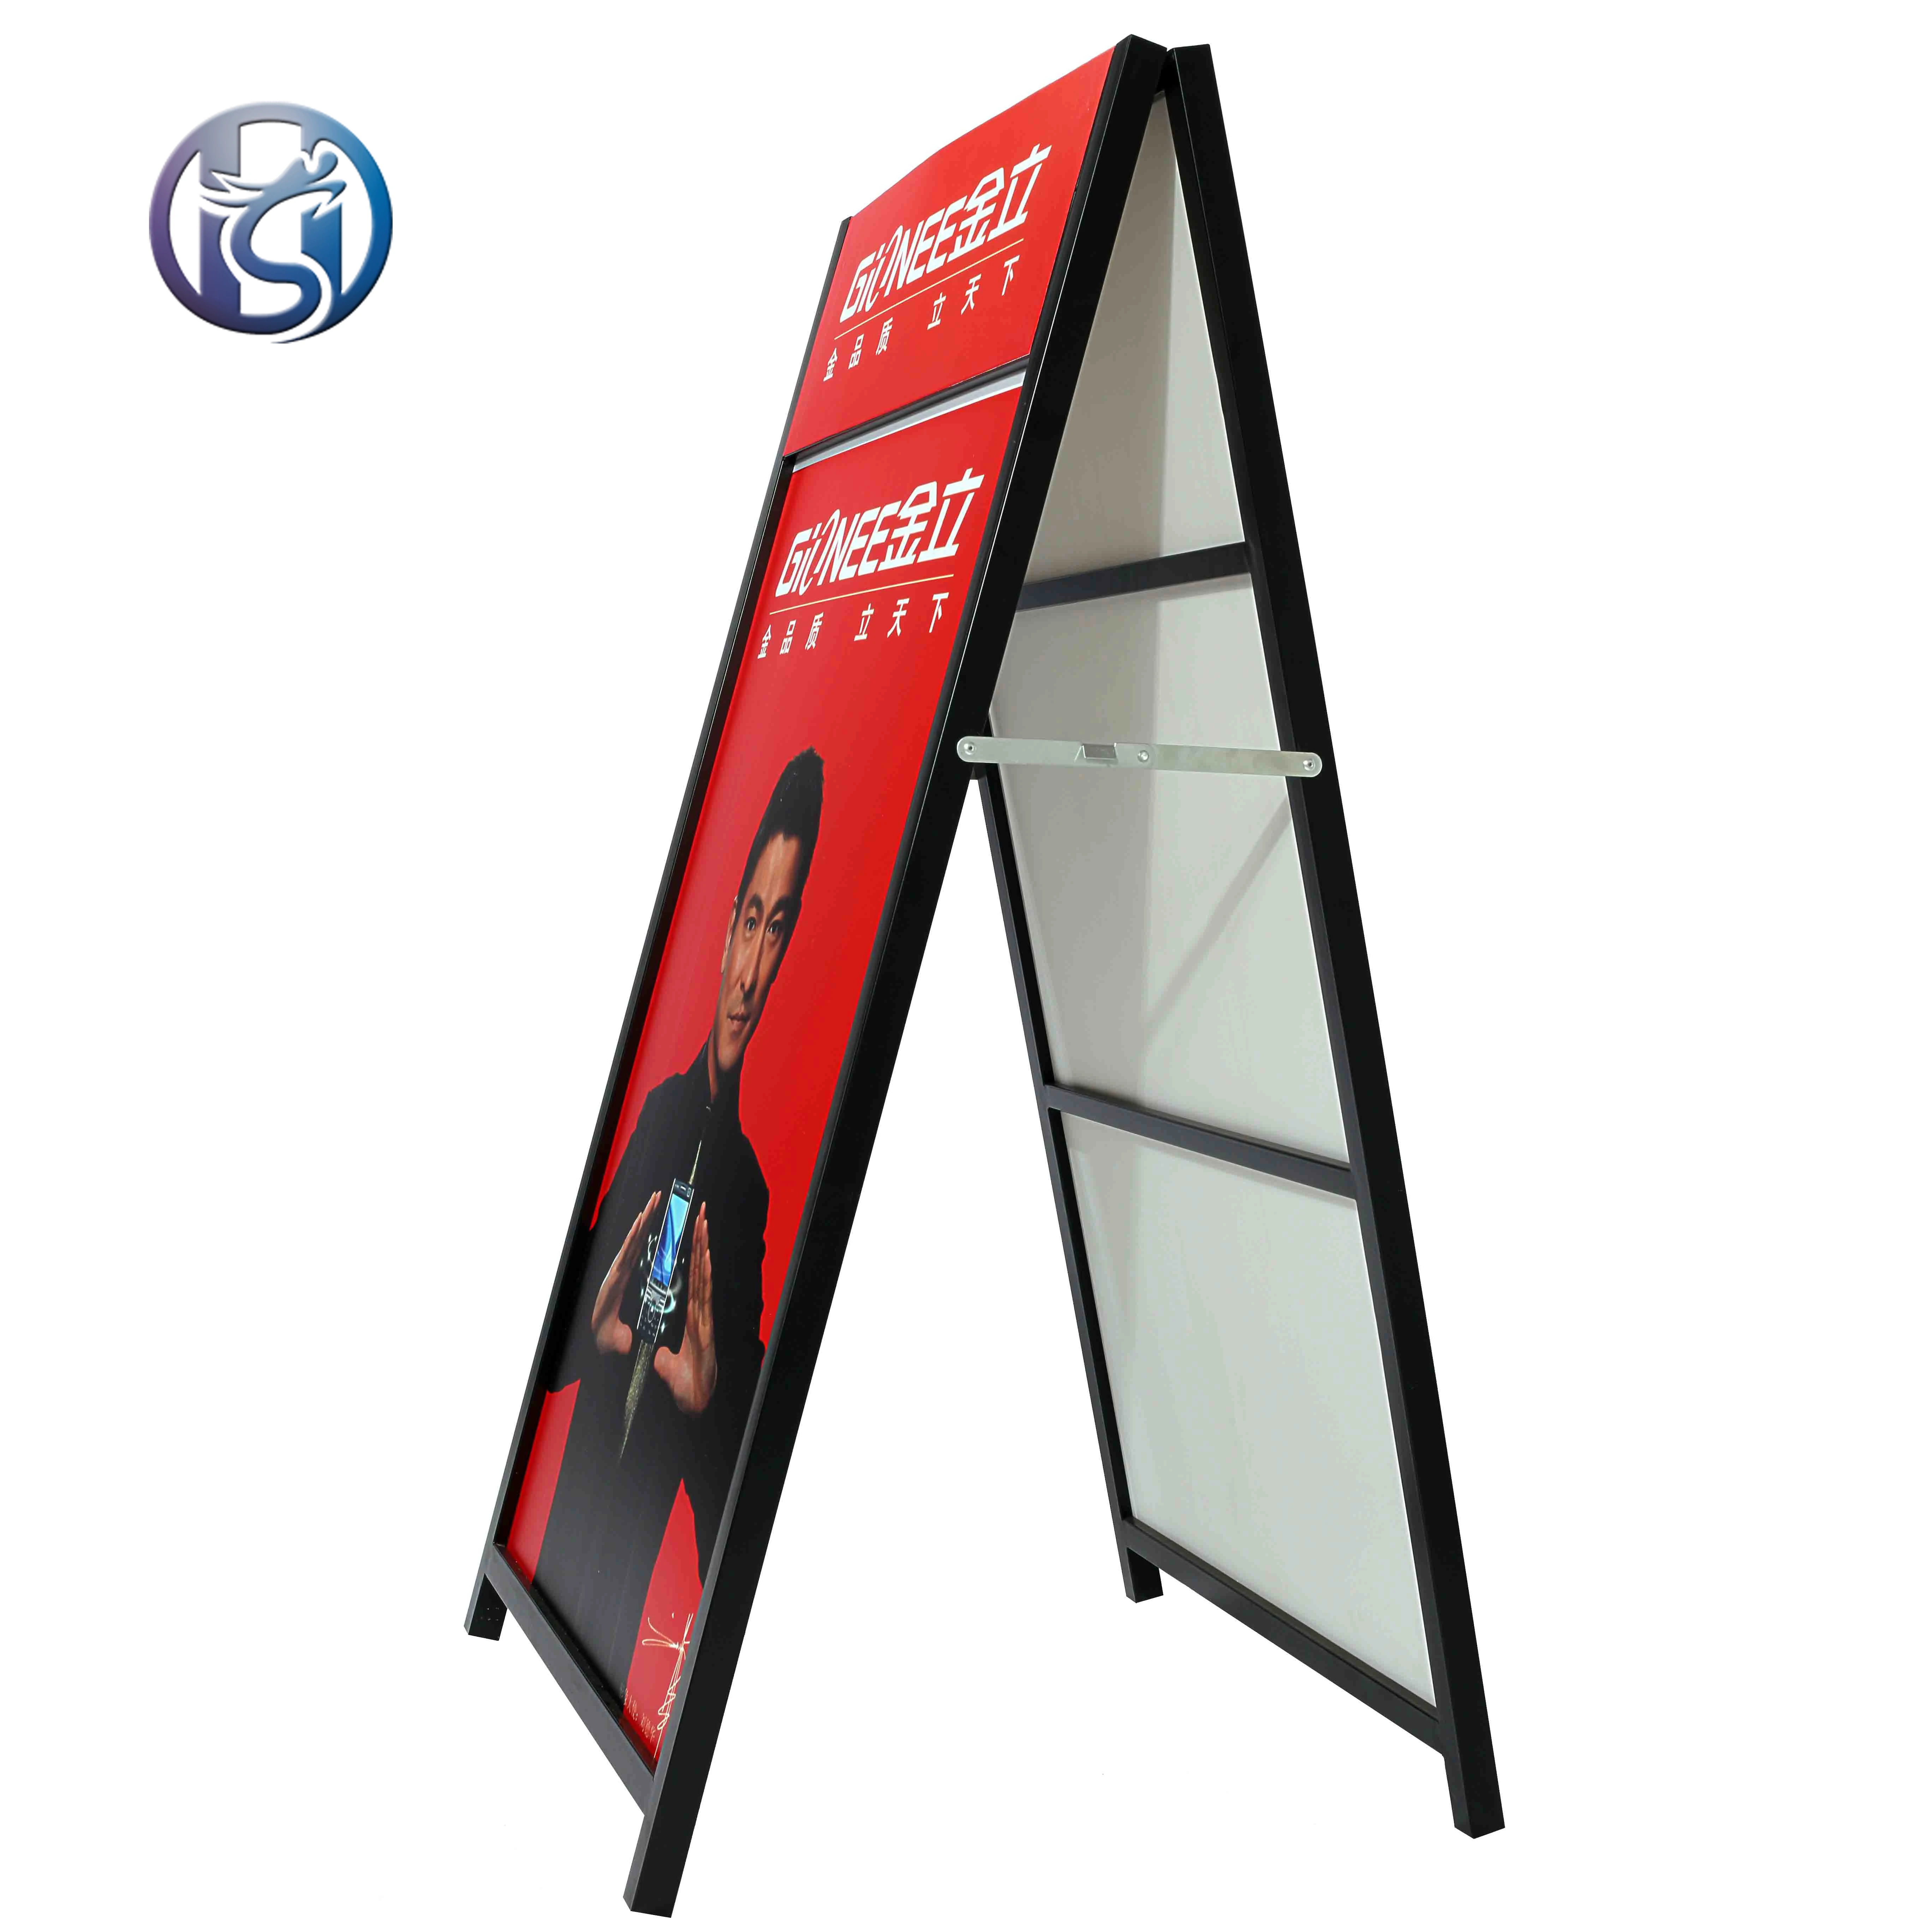 Floor Display Advertising Board Iron Poster Frame Pavement Sign HS-H25